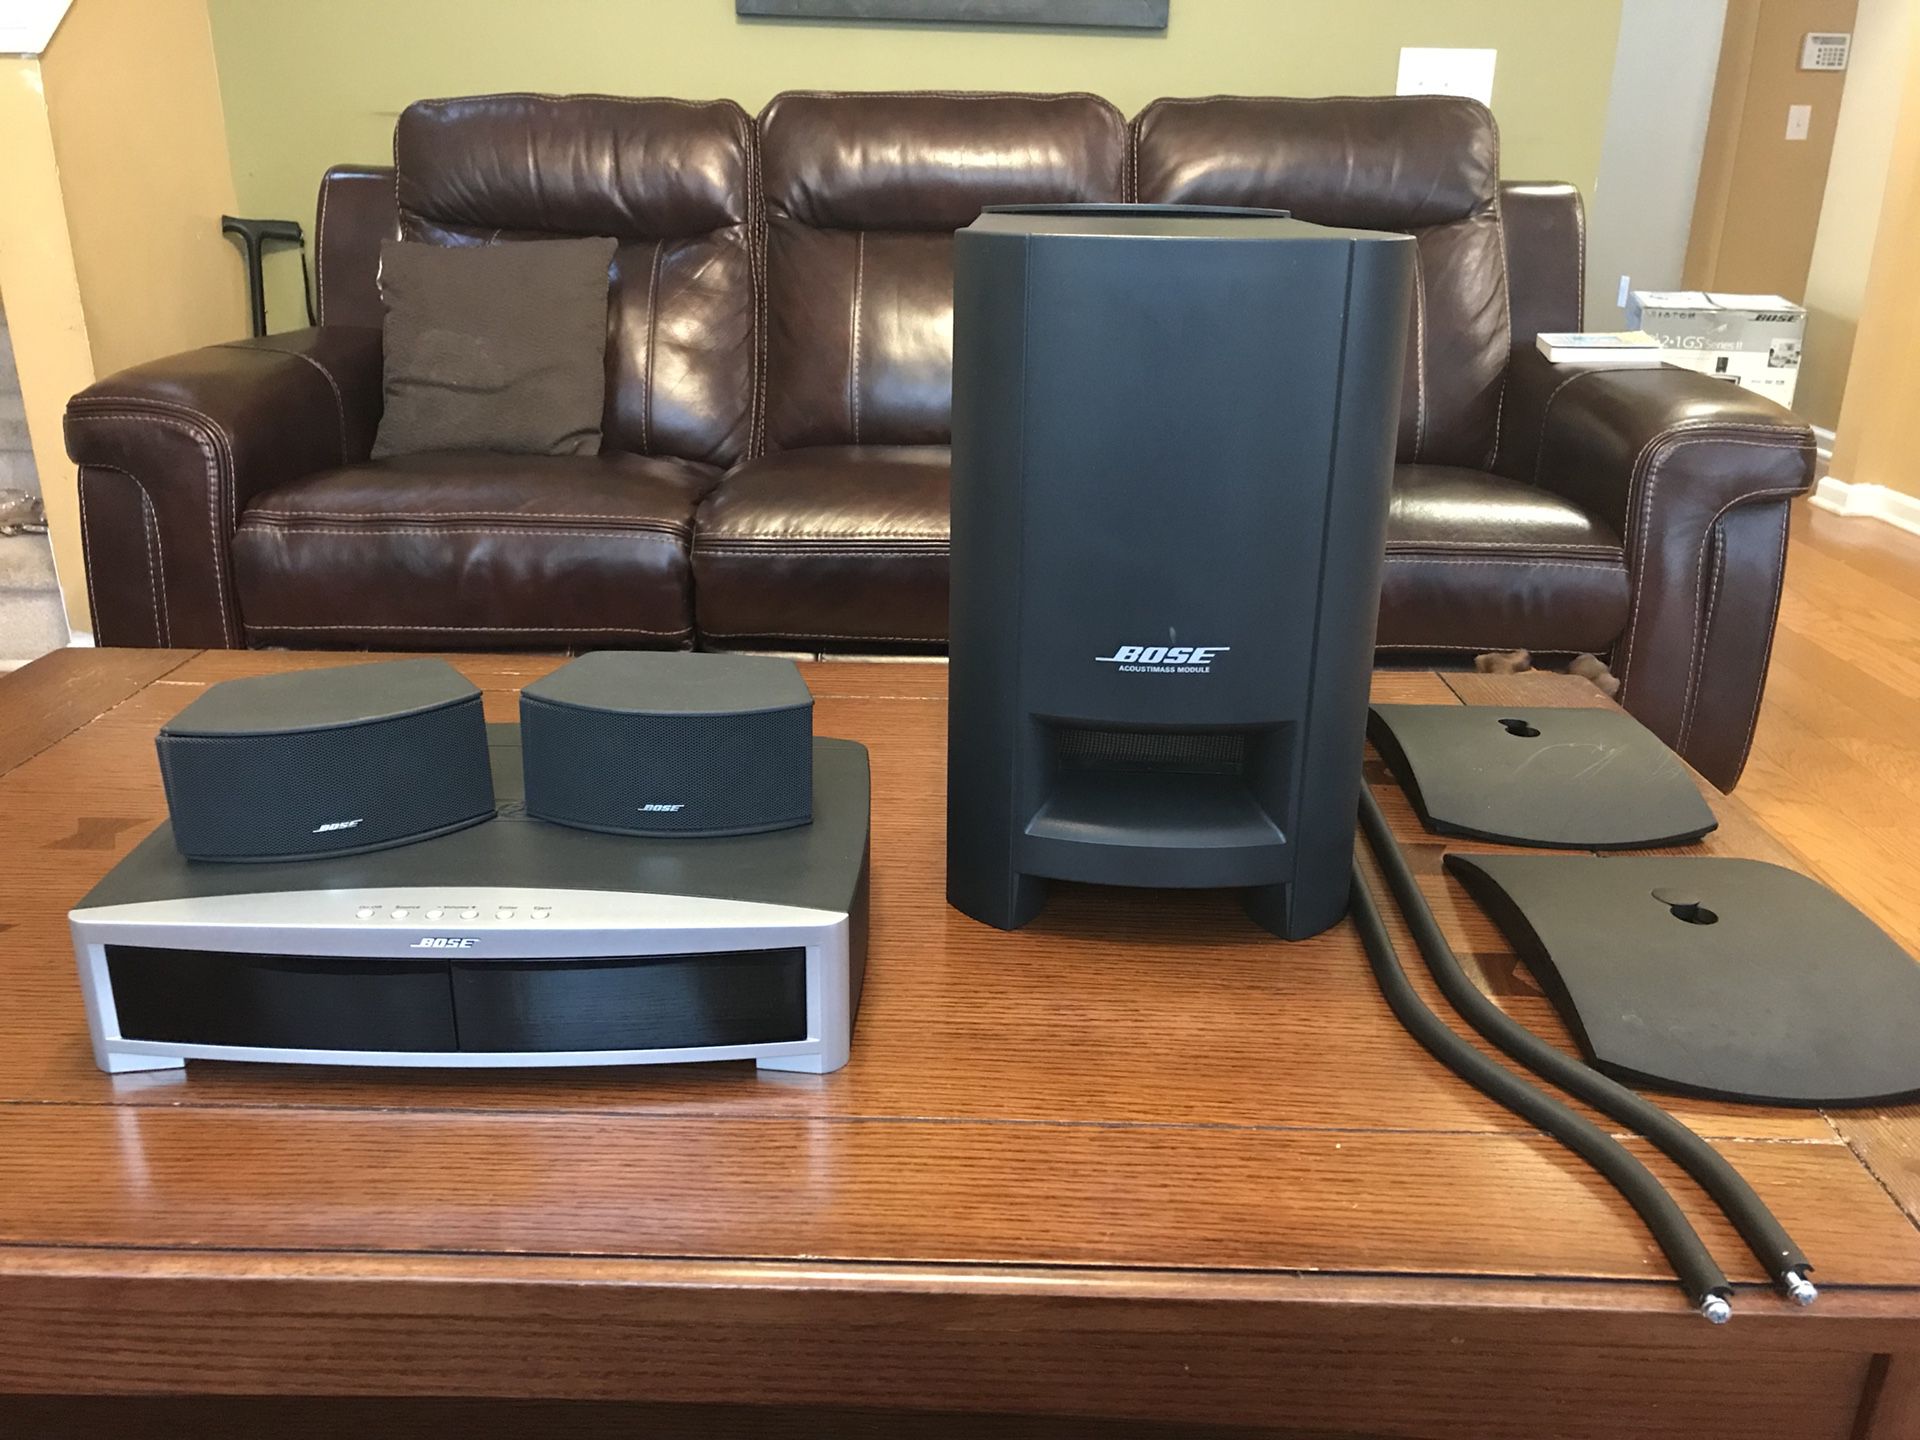 Used 321 GS Series II DVD Home Entertainment System - Graphite (with out remote) comes speaker stand for Sale in NC - OfferUp